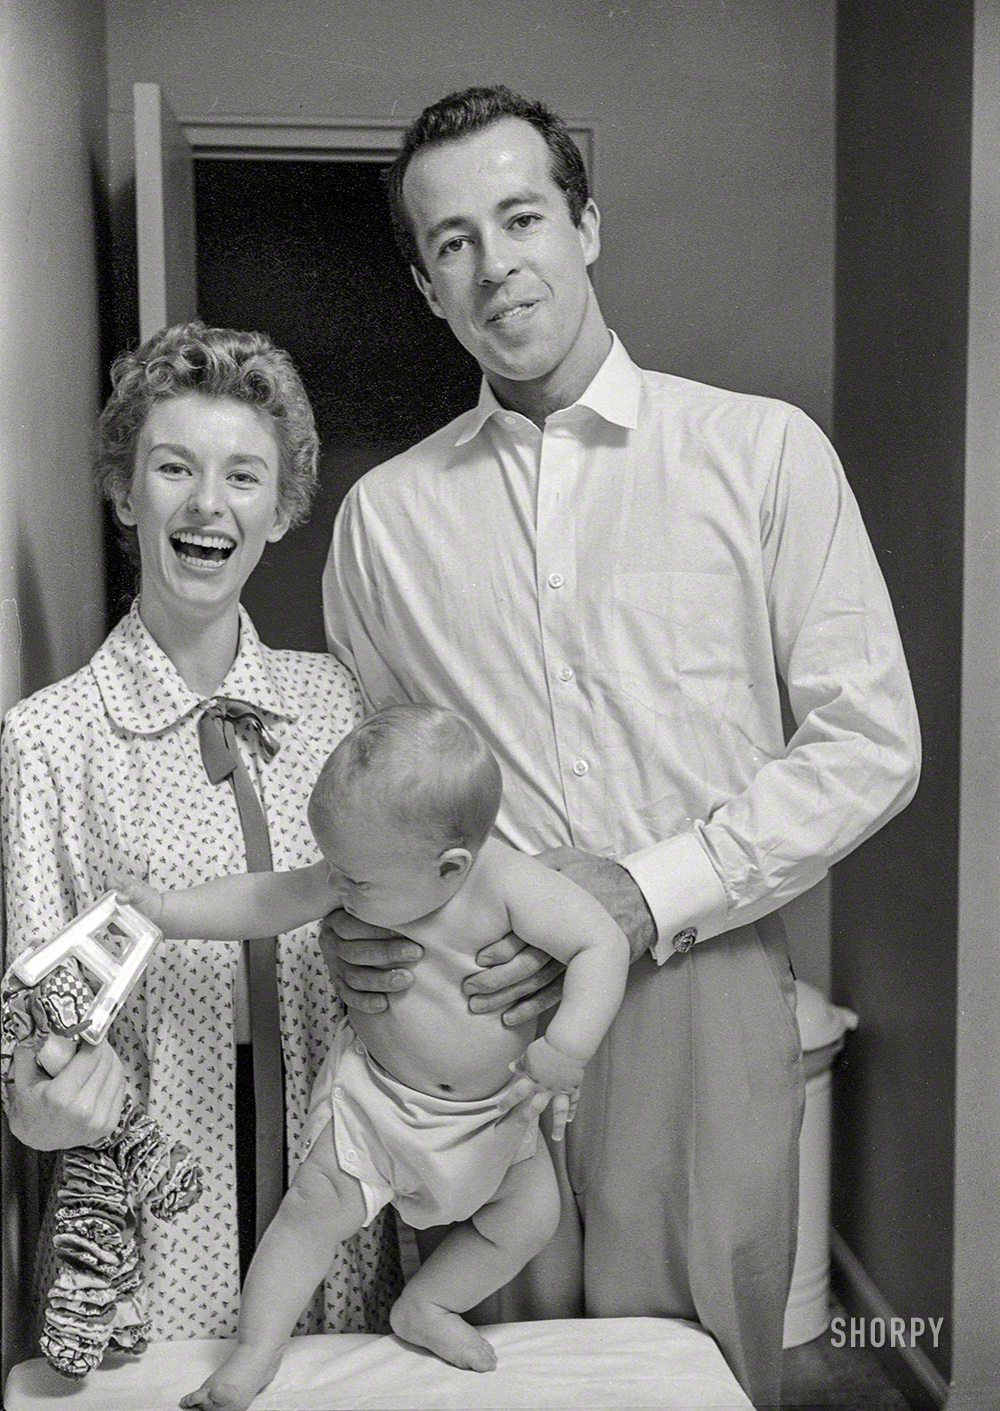 April 1954. New York. "Actress Cloris Leachman at home with husband George Englund and baby Adam." The future Oscar and Emmy winner would be coming soon to the big screen in the 1955 noir classic Kiss Me Deadly. 35mm negative from photos by Phillip Harrington for Look magazine. View full size.